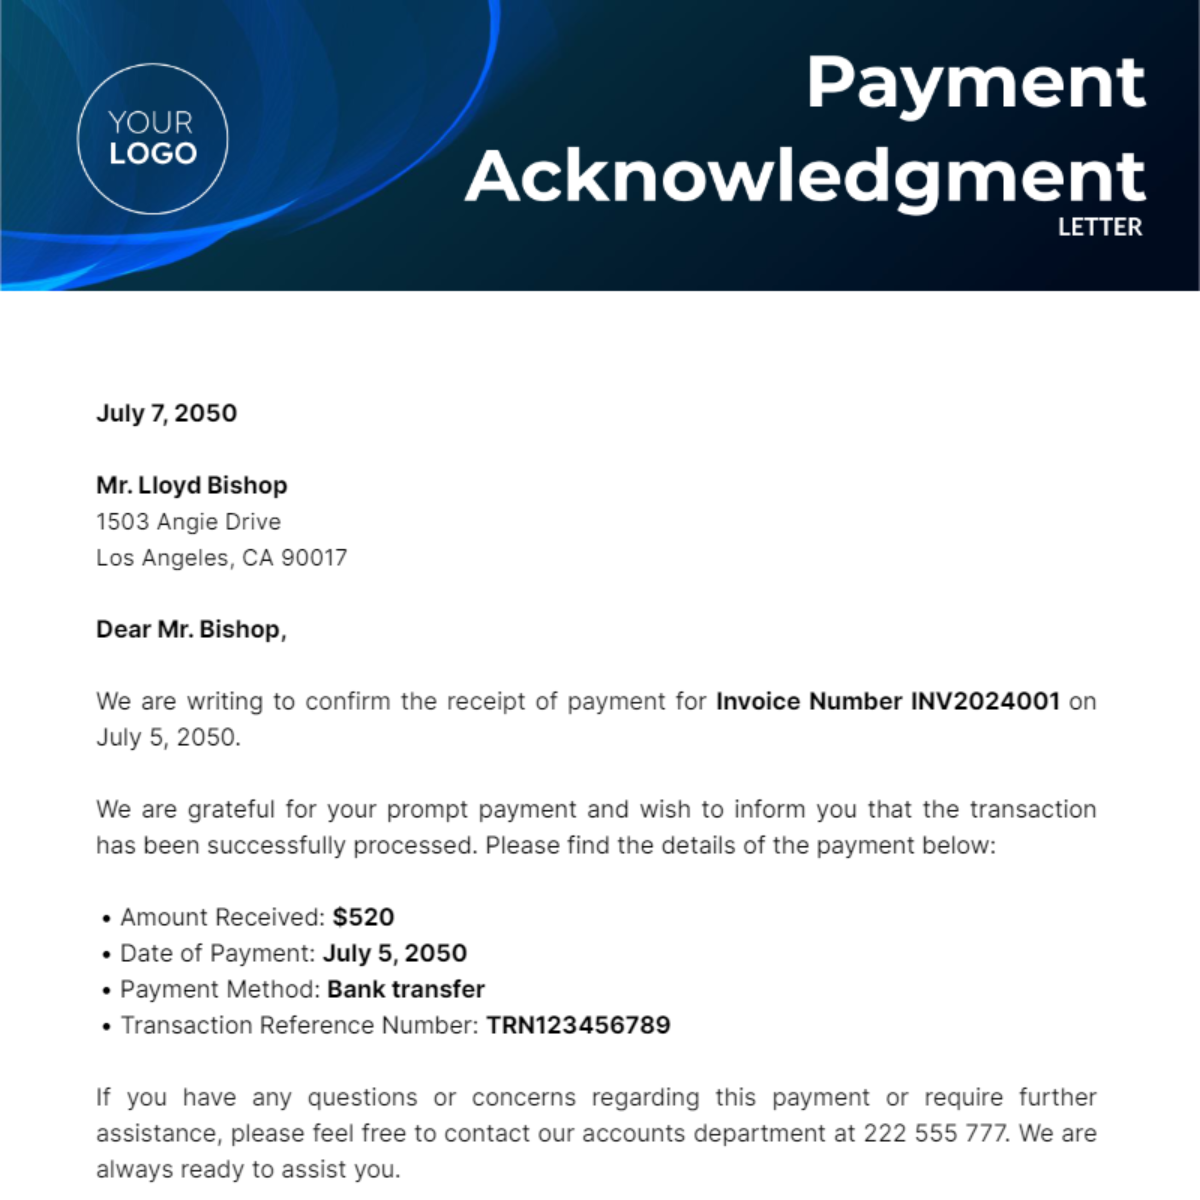 Payment Acknowledgment Letter Template